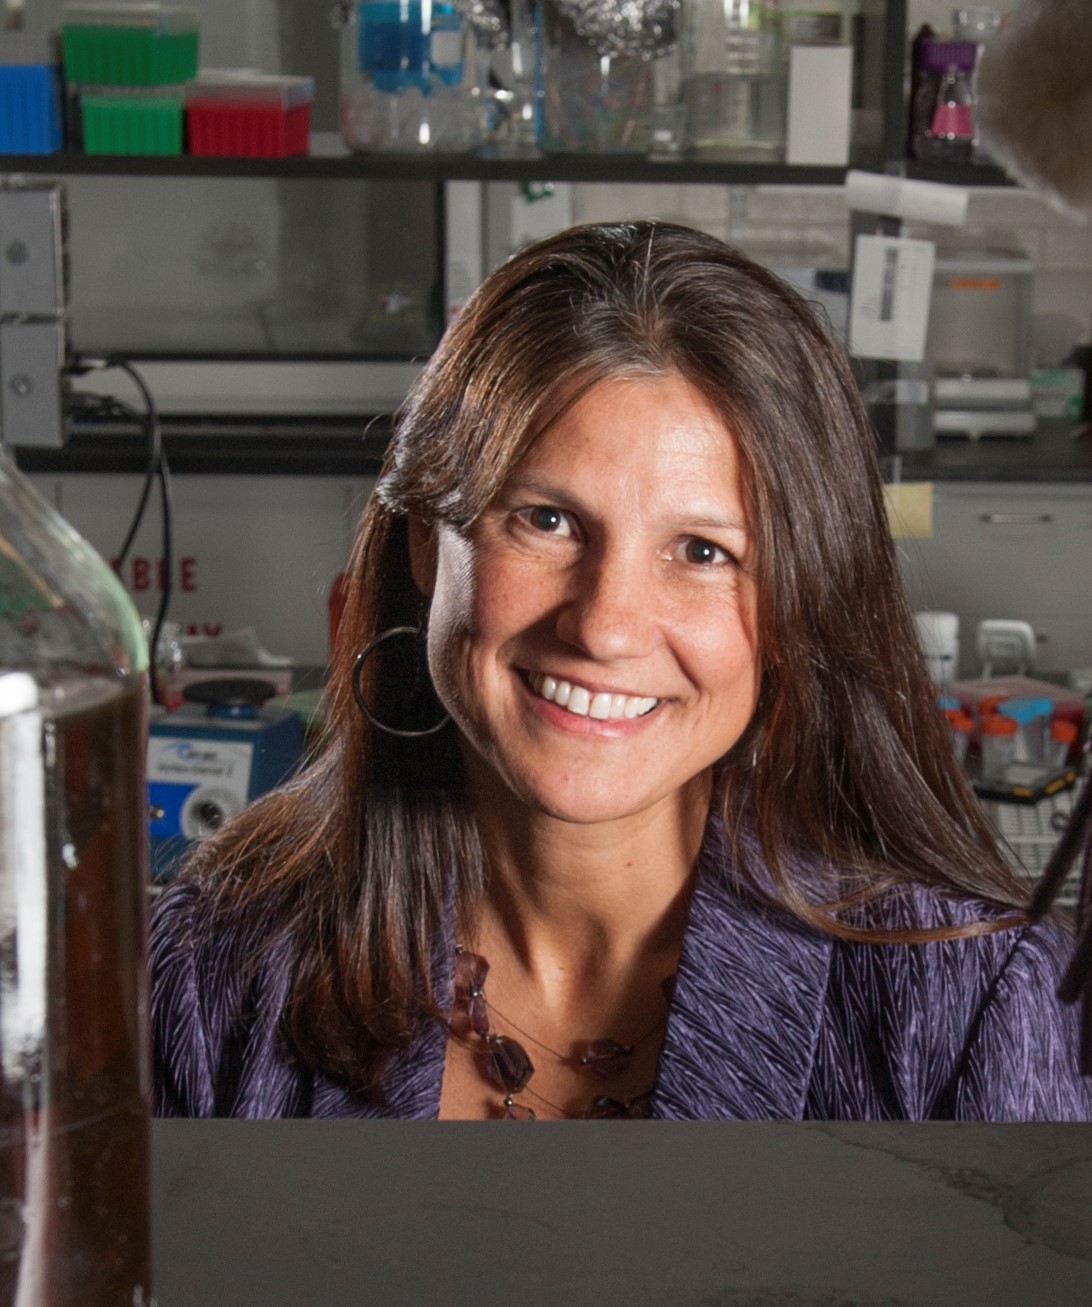 Woman with long brown hair and silver hoop earrings smiles at the camera. She is in a lab.